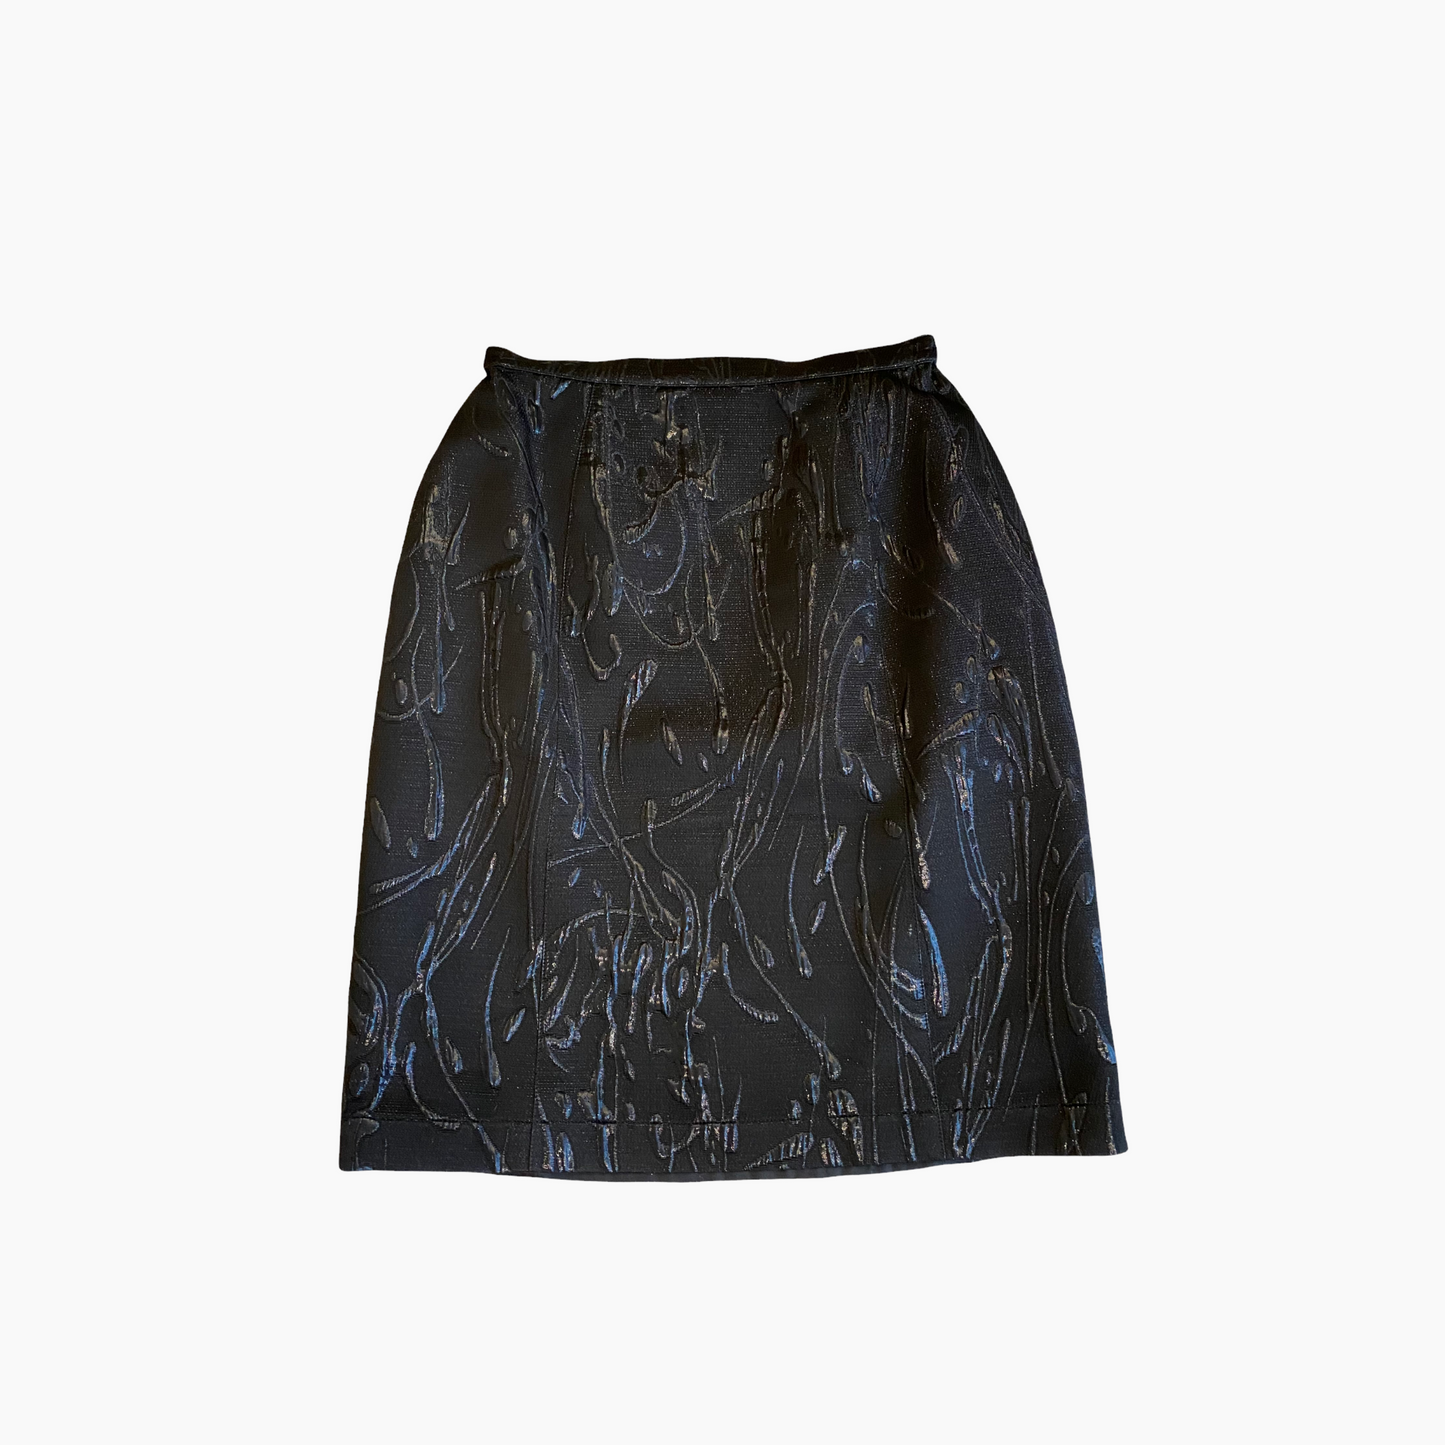 Thierry Mugler vintage skirt in black structured fabric - S - 1990s